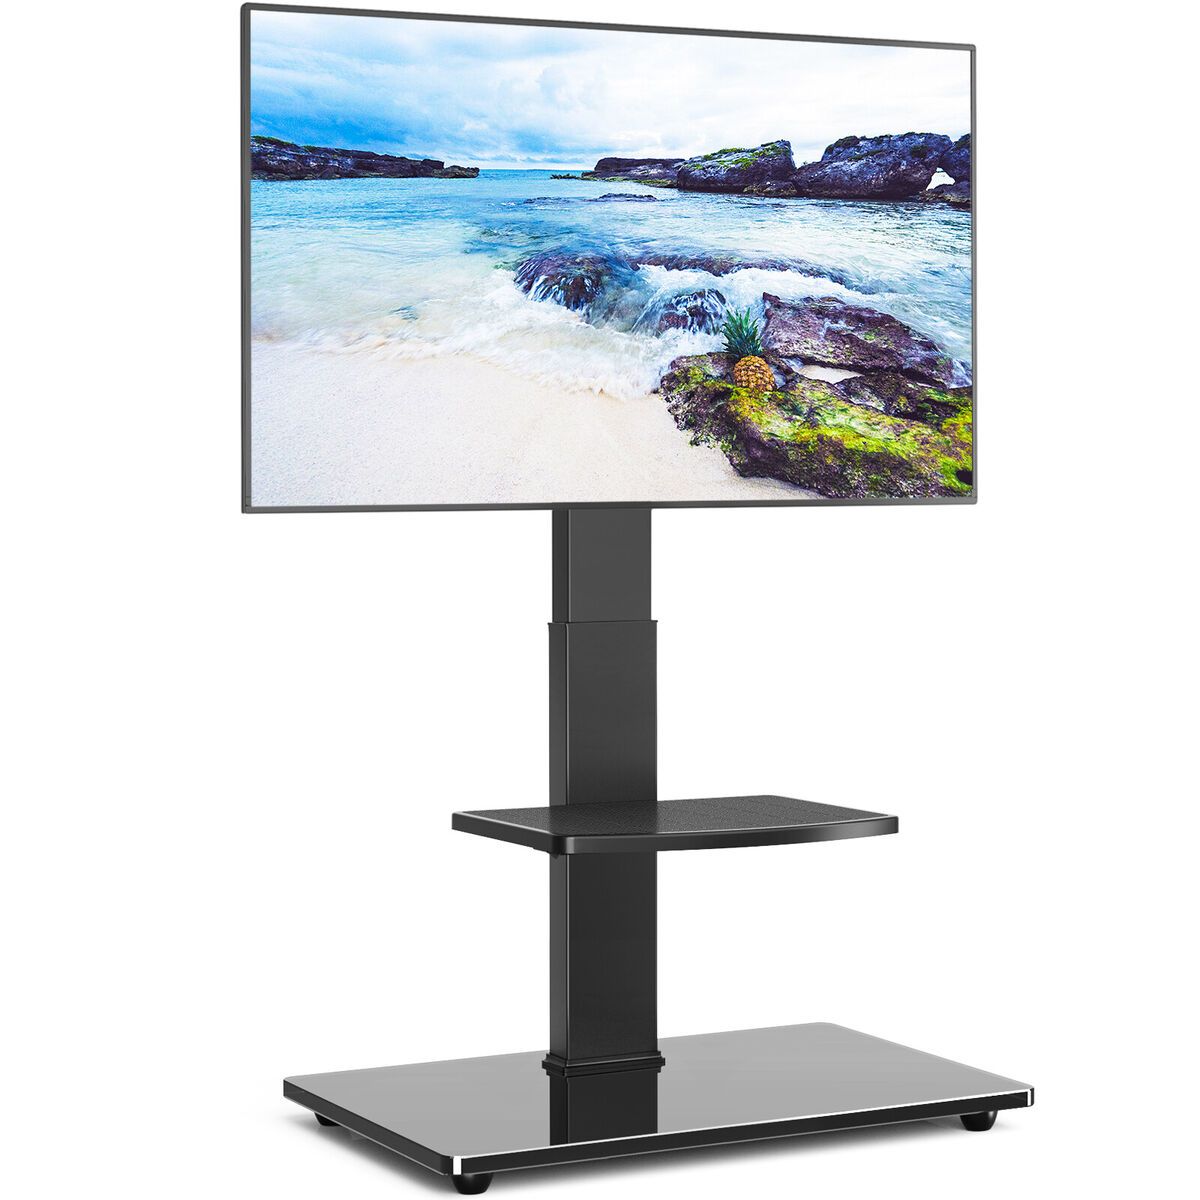 Universal Floor Tv Stand Tall W/bracket Mount Free Standing For 32 65"led  Lcd | Ebay Pertaining To Universal Floor Tv Stands (View 15 of 15)